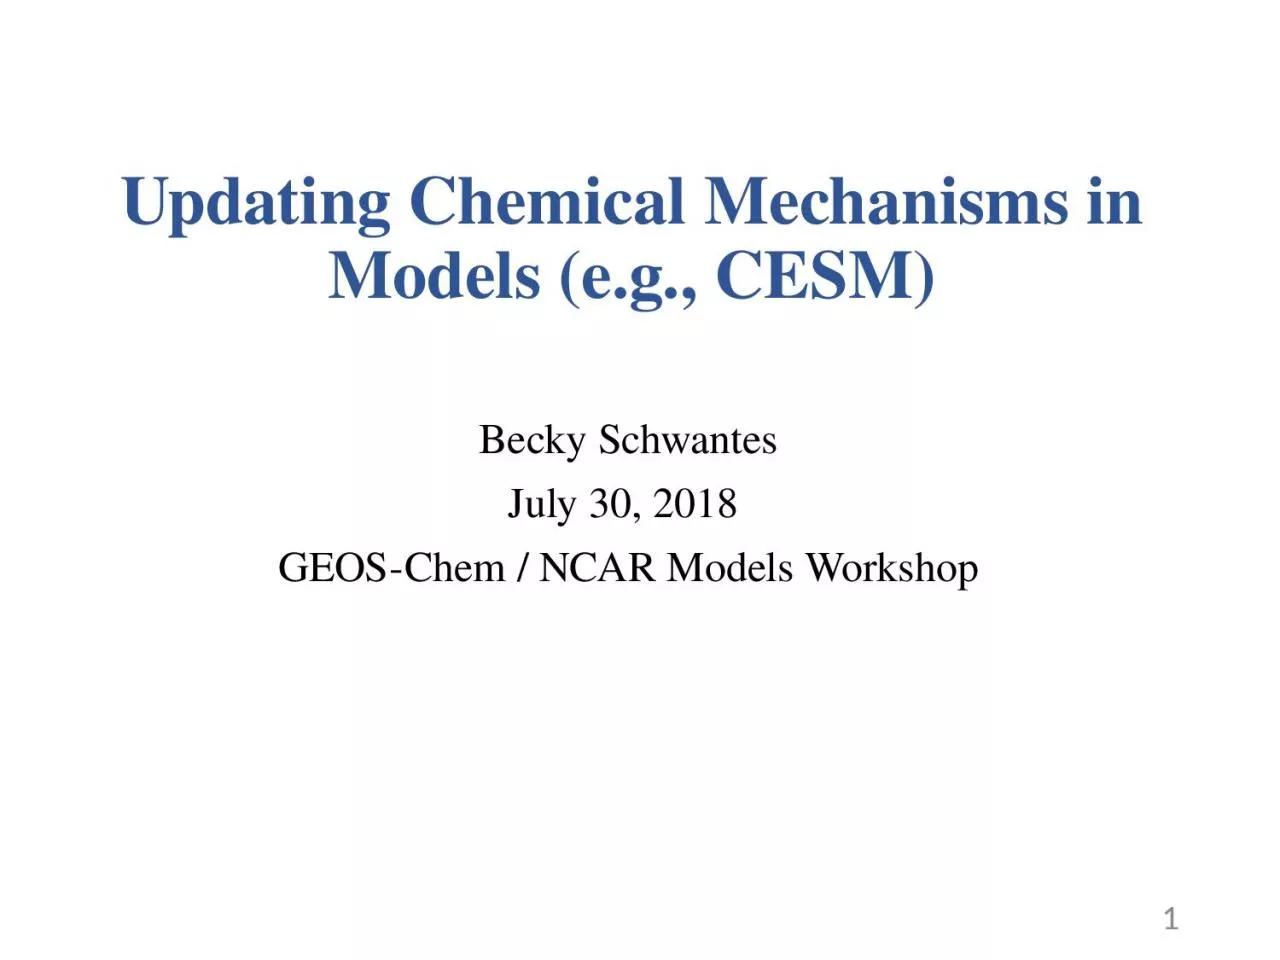 Updating Chemical Mechanisms in Models (e.g., CESM)